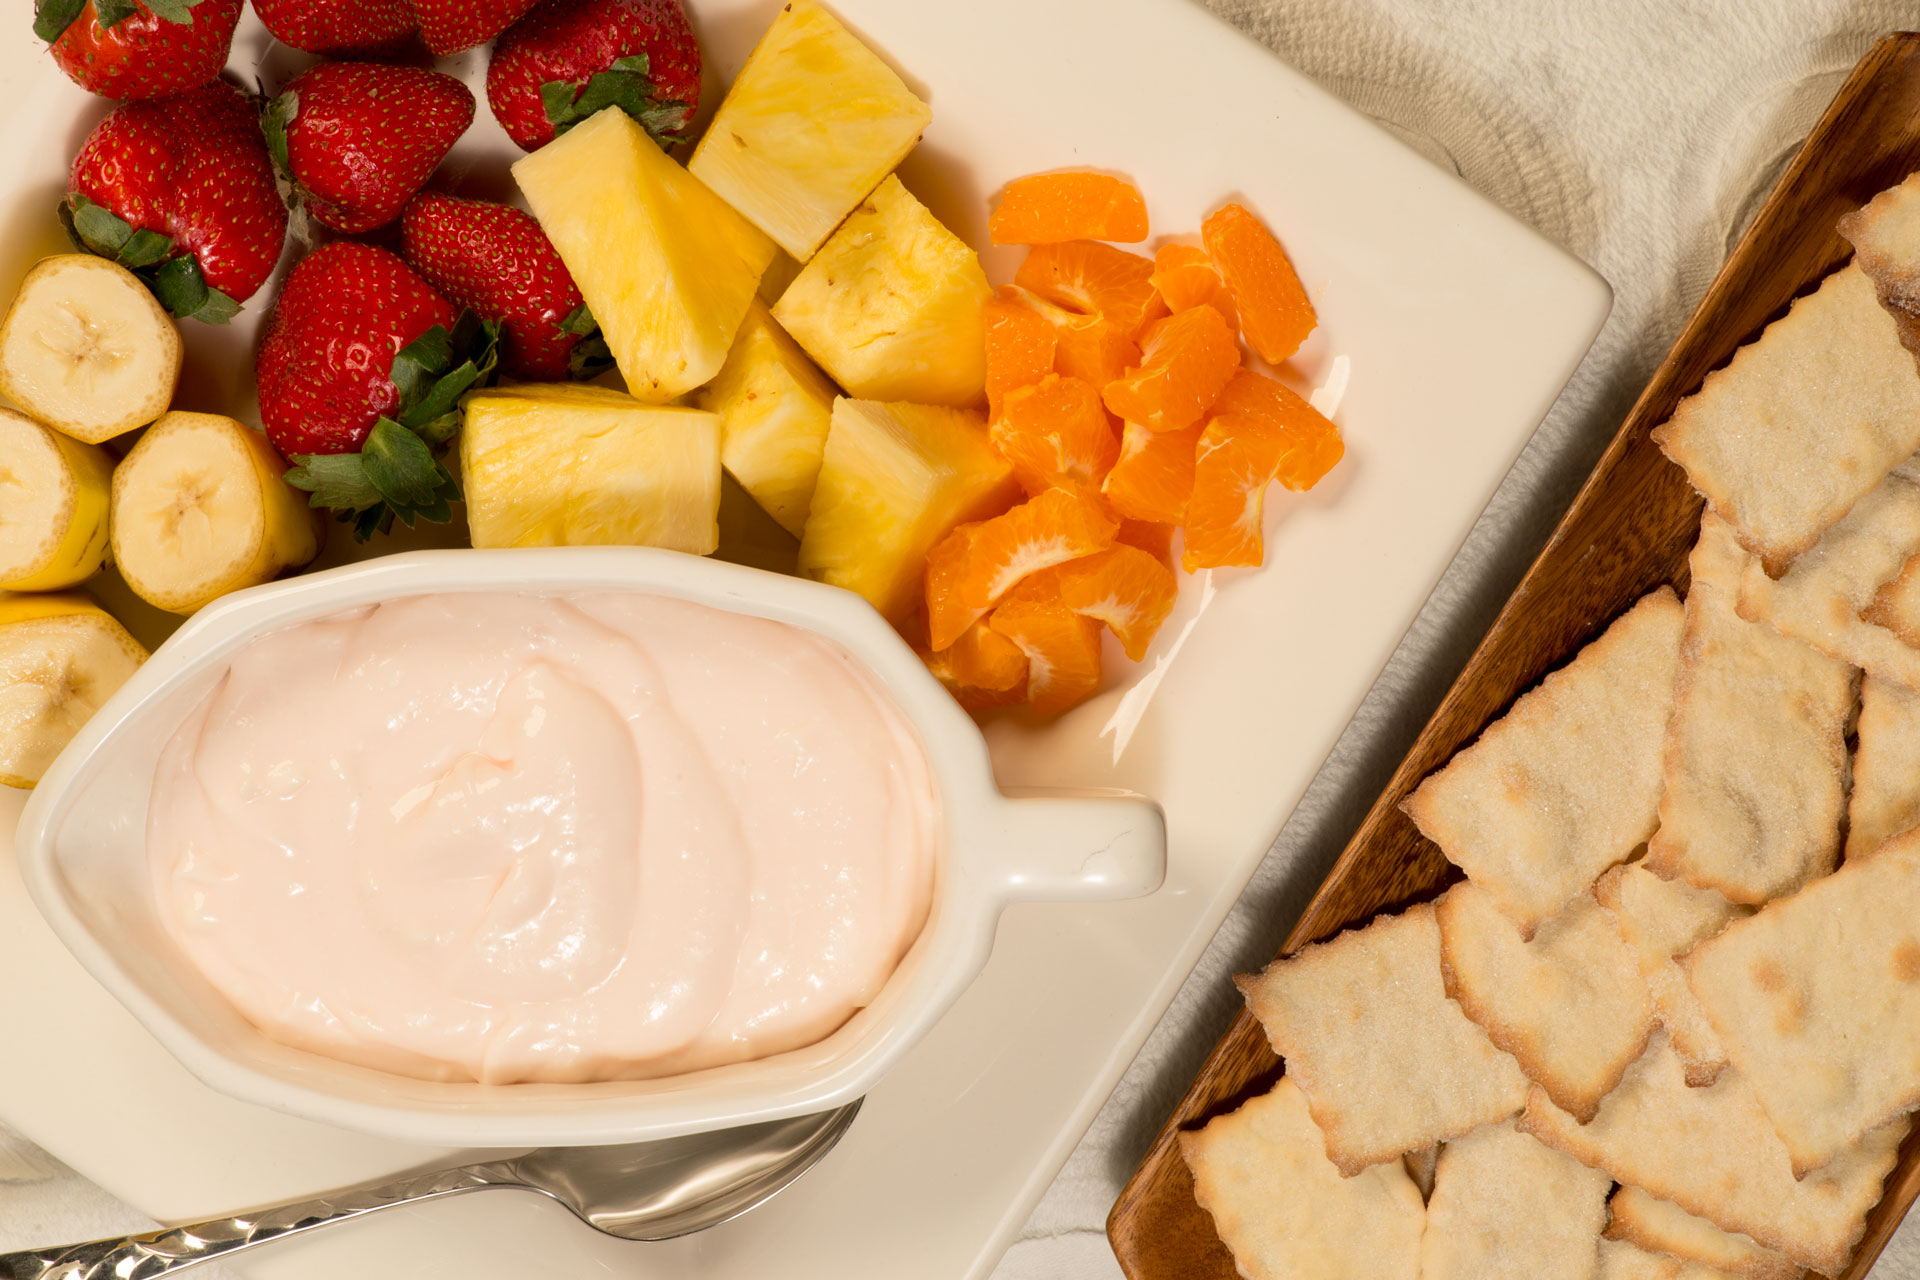 Just three ingredients and you can serve this Yogurt Fruit Dip with just about anything for a snack that feels healthier.